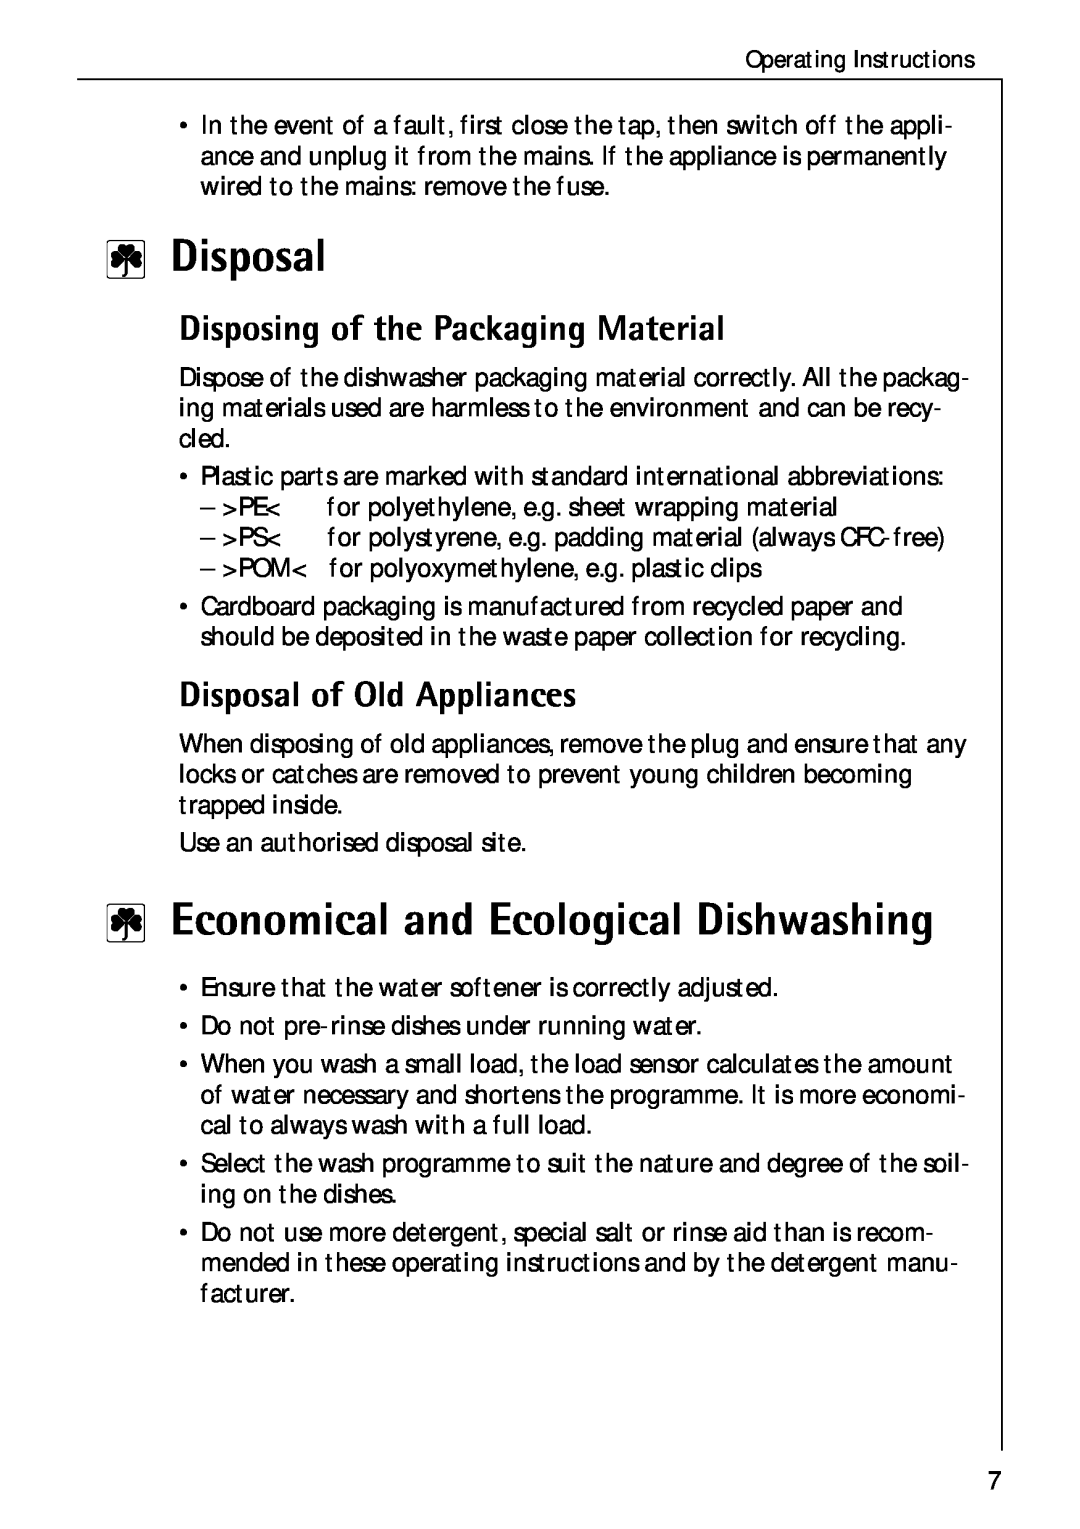 Electrolux 50750 VI manual Disposal, Economical and Ecological Dishwashing, Disposing of the Packaging Material 